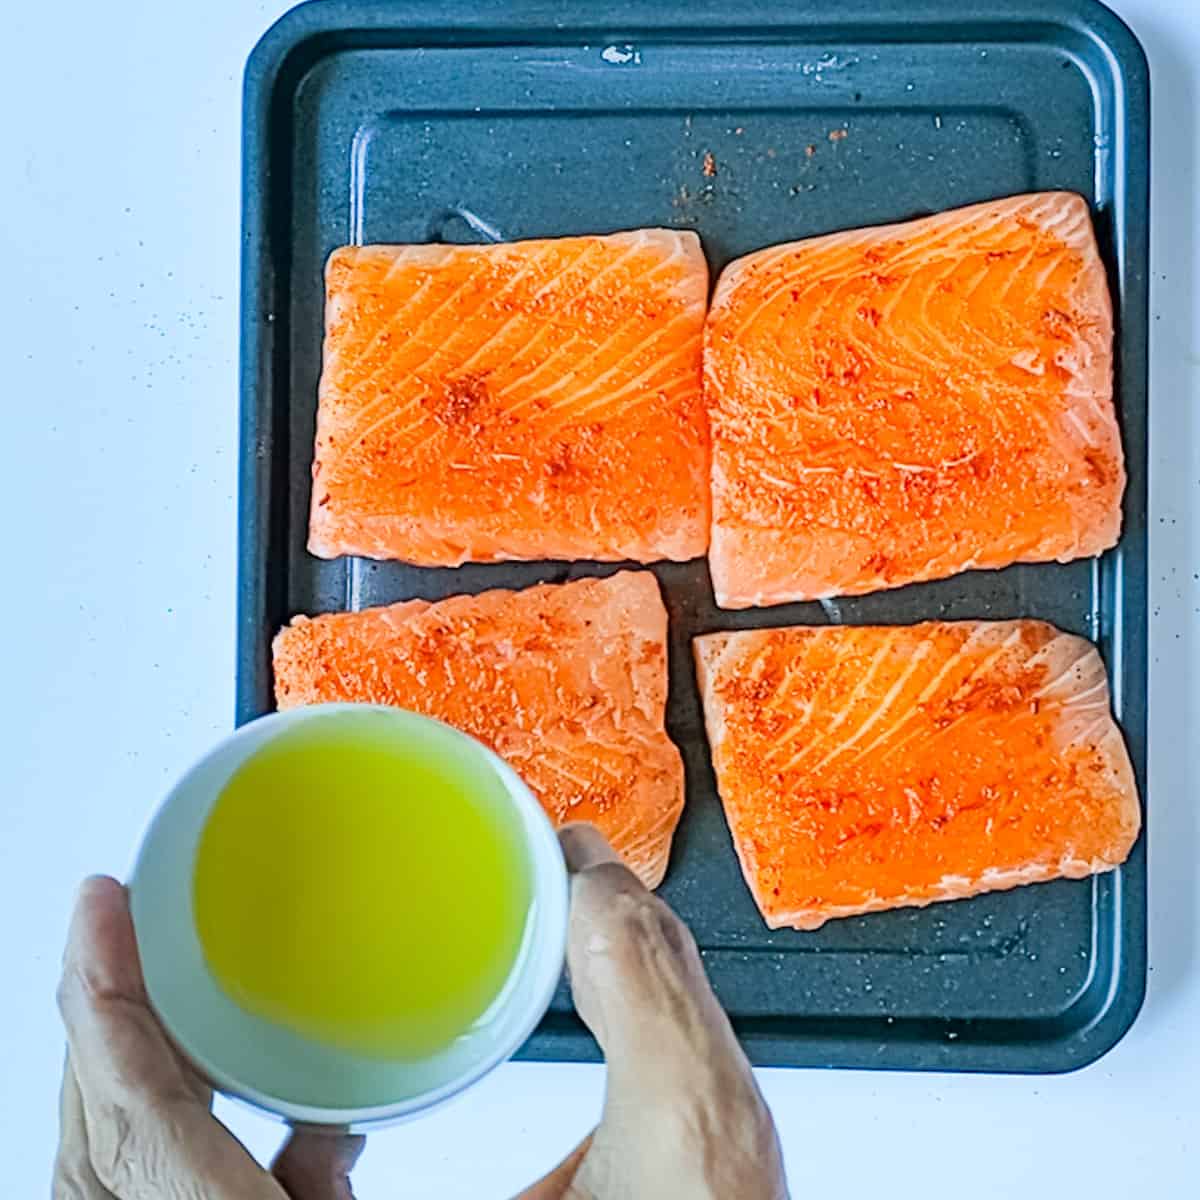 Lemon juice being drizzled on seasoned salmon fillets on a tray.